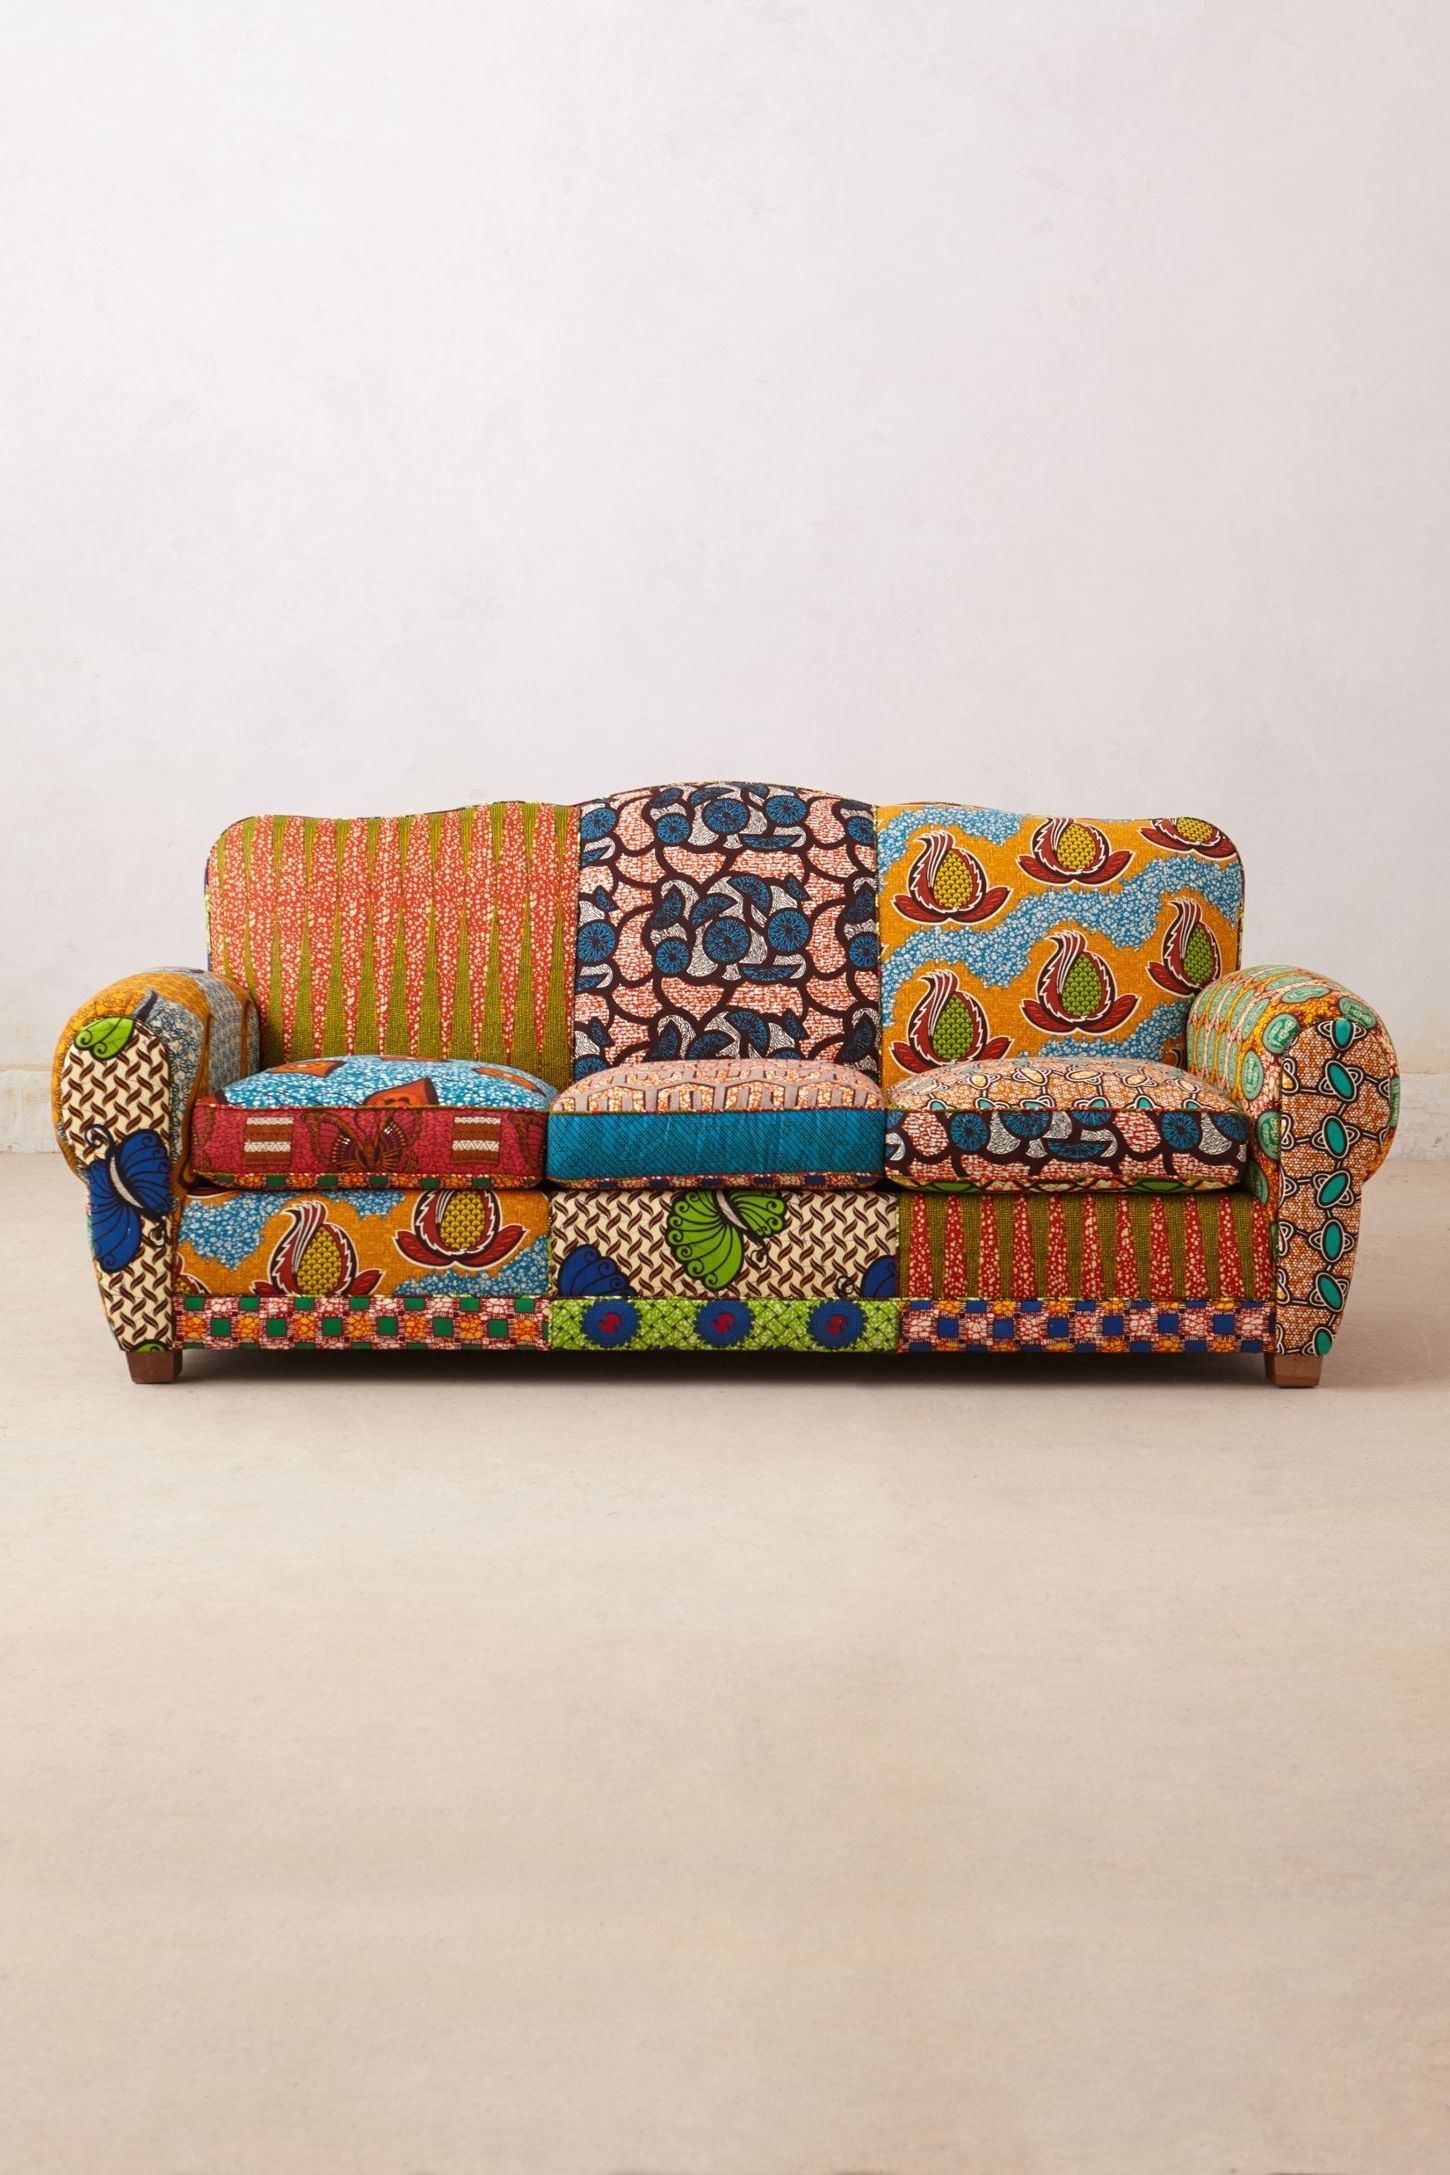 Most Recent Printed Fabric Sofa Set Designs – Latest Sofa Pictures With Sofas In Pattern (View 6 of 15)